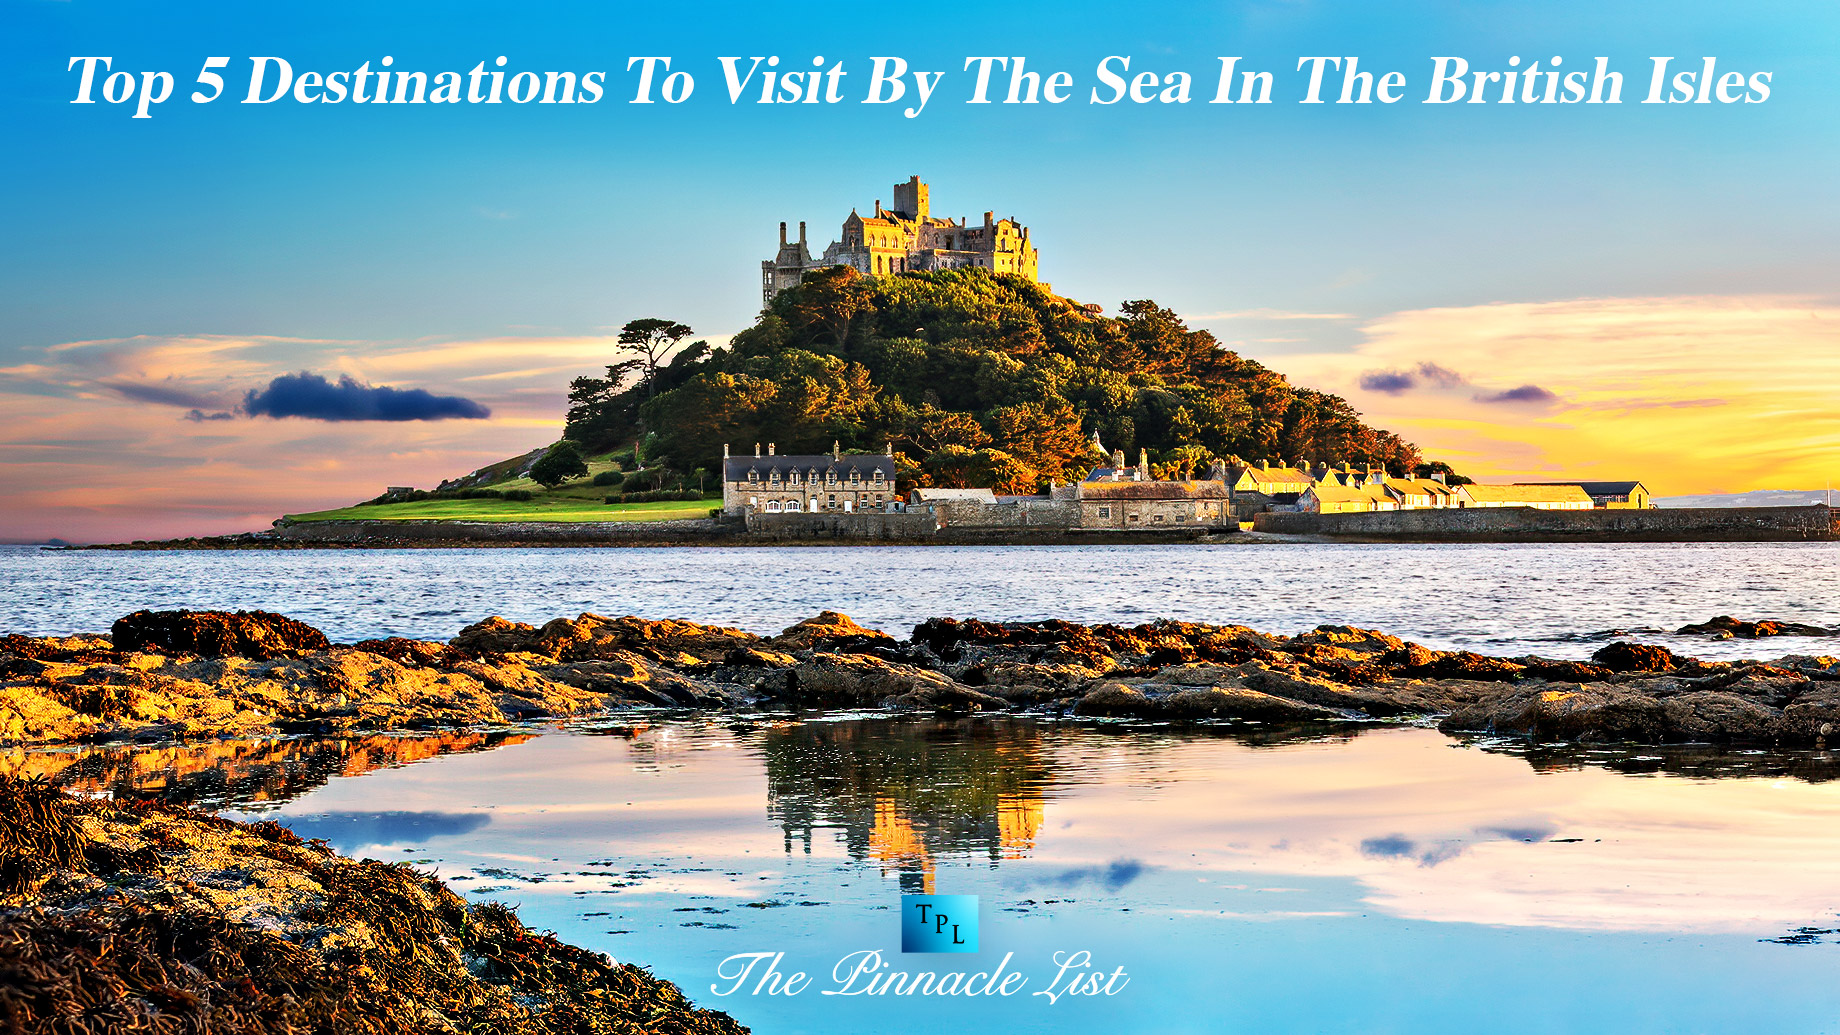 Top 5 Destinations To Visit By The Sea In The British Isles